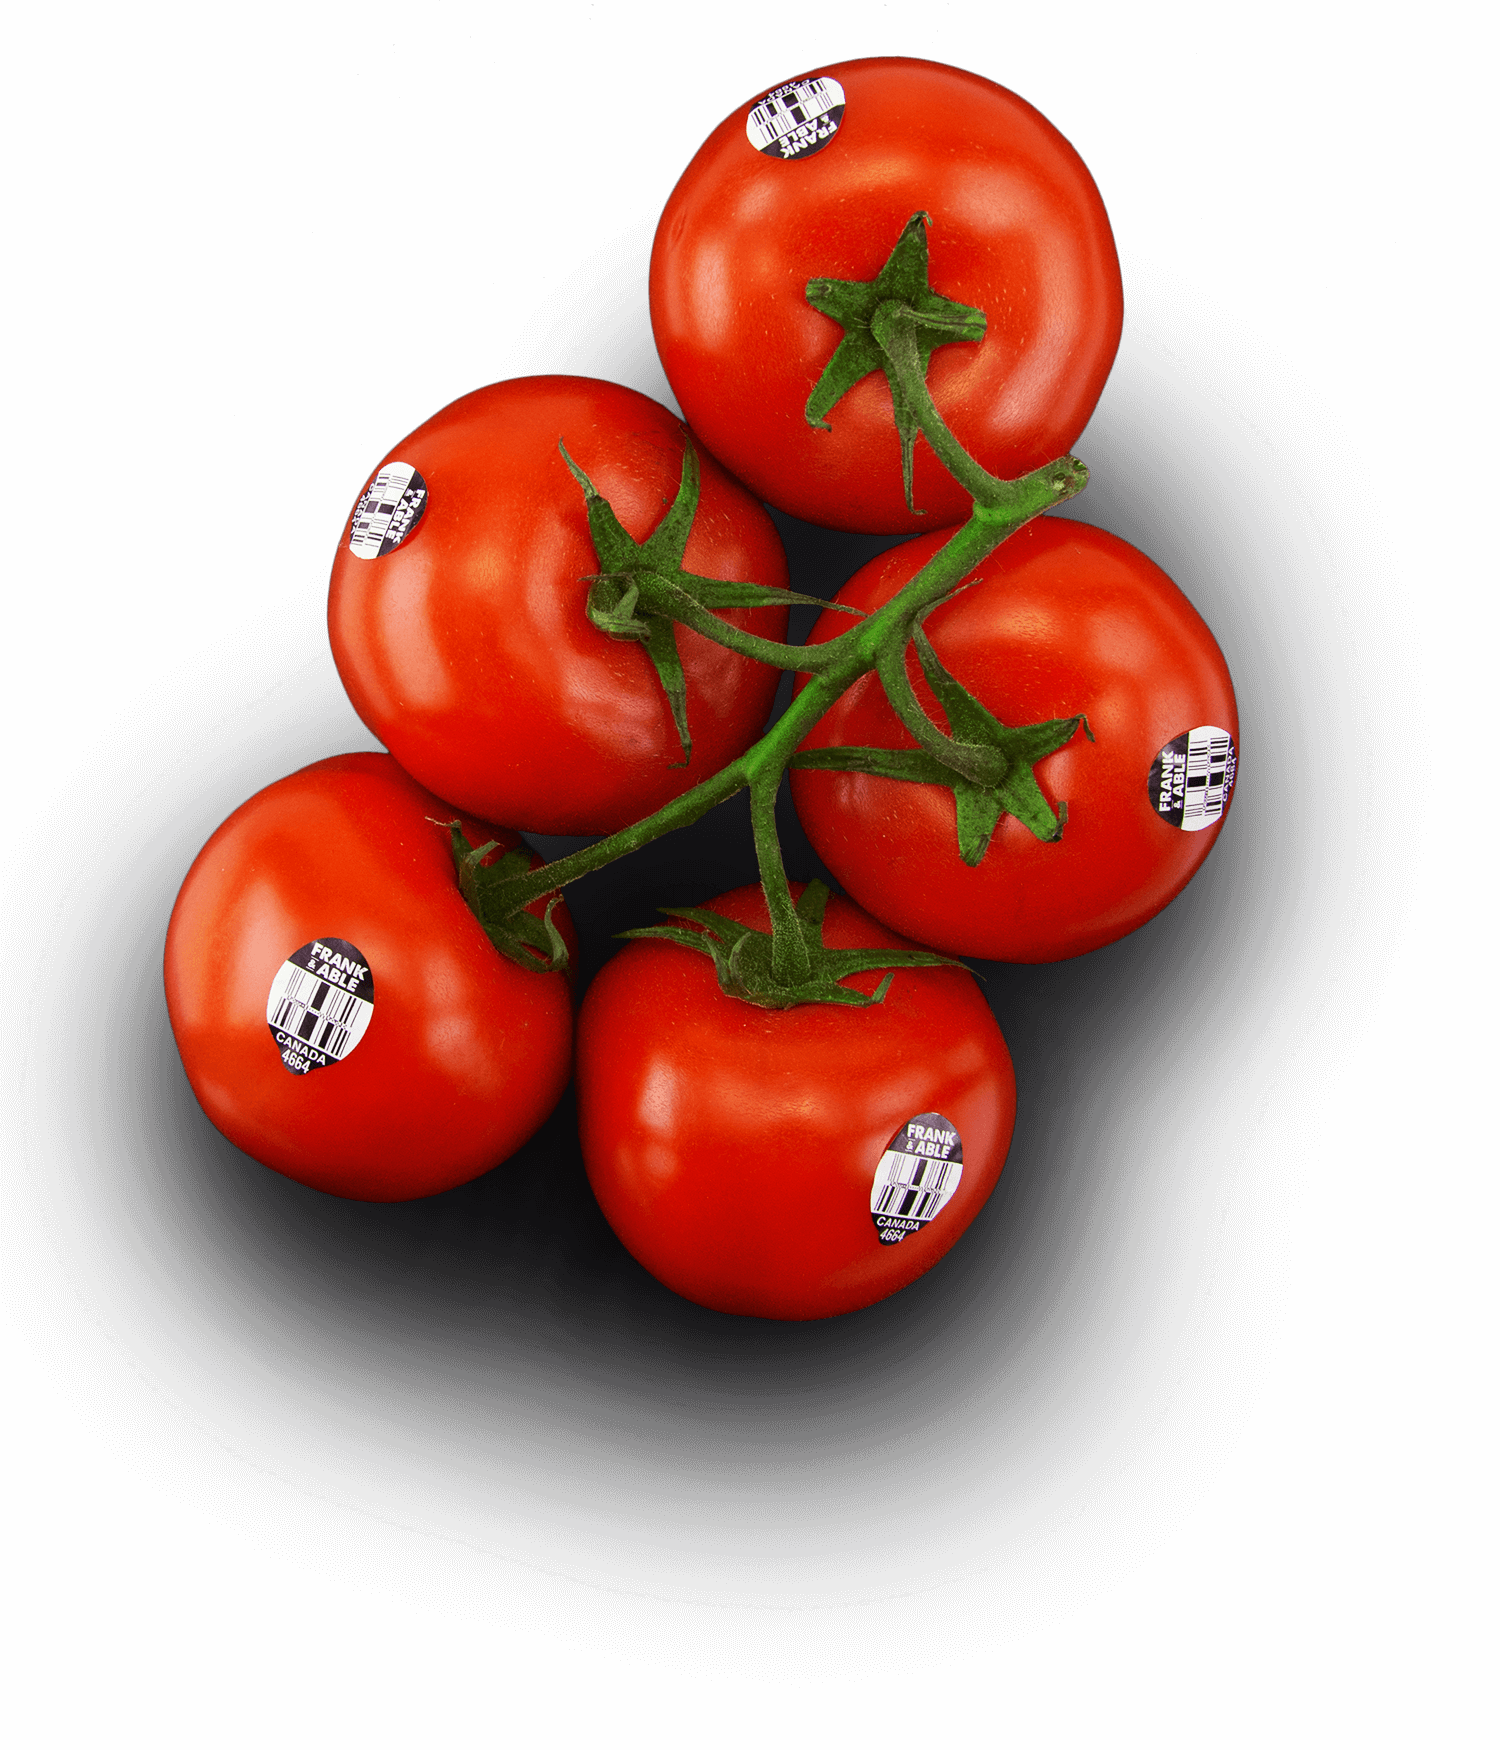 Frank & Able Tomatoes